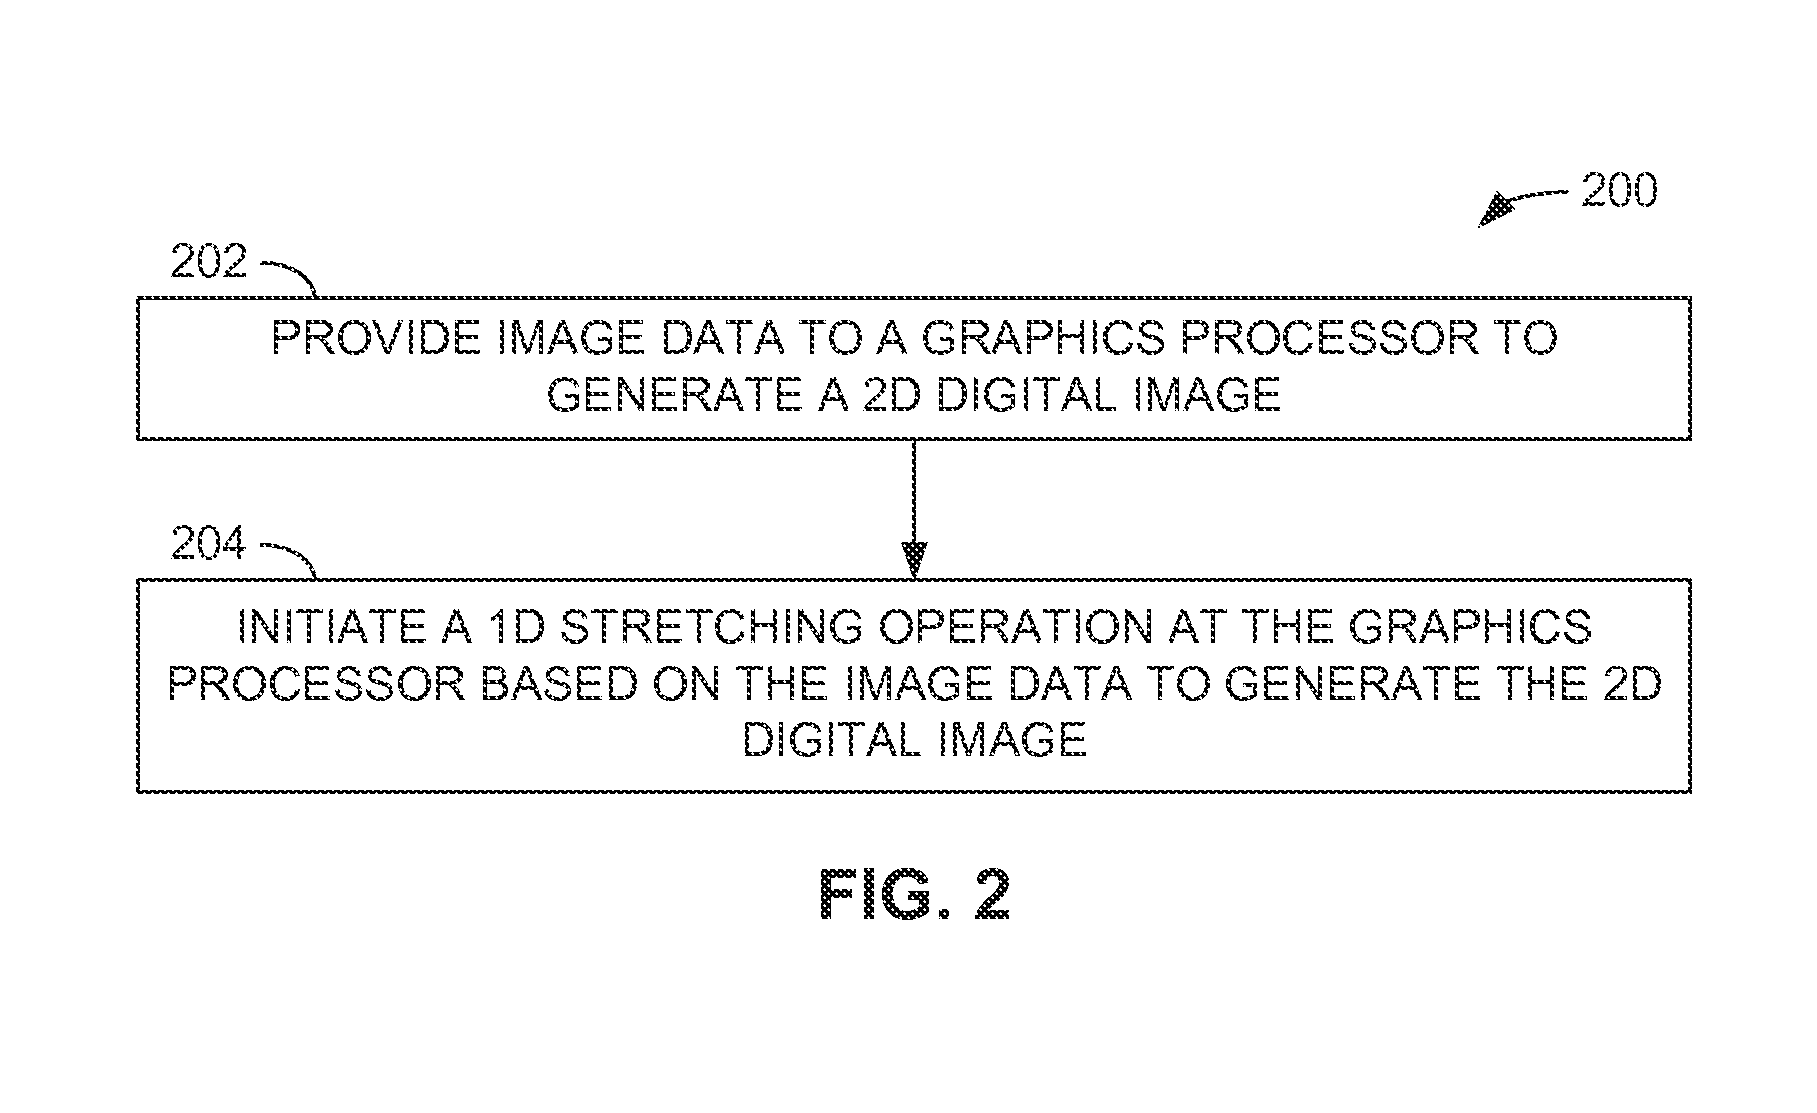 Accelerated image gradient based on one-dimensional data